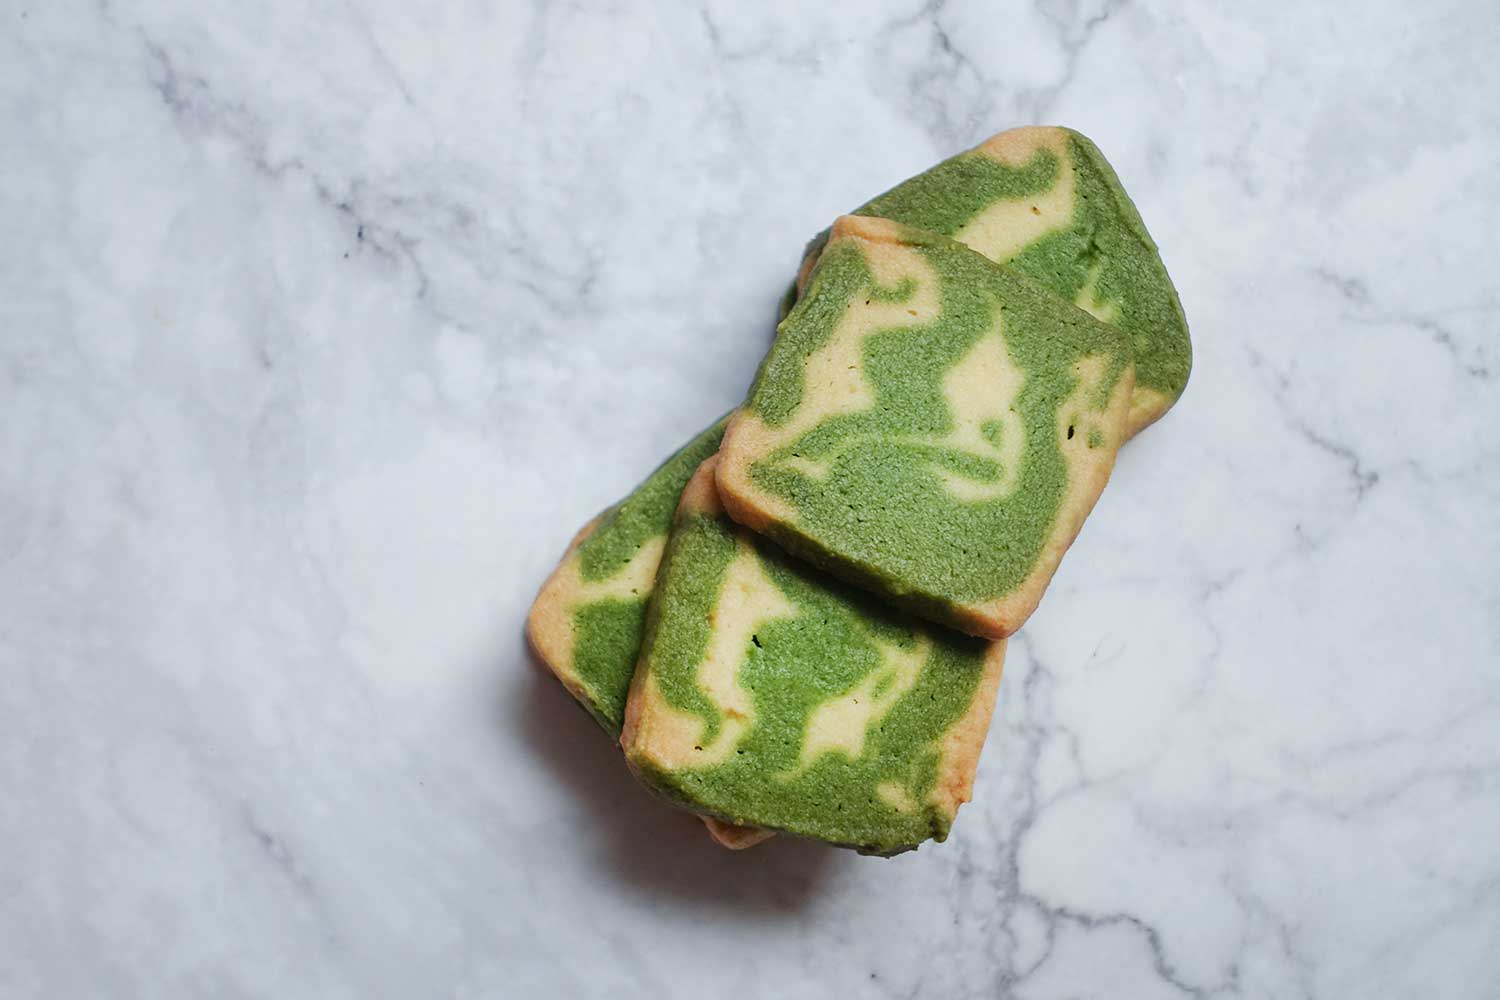 Baking with Matcha - how to prepare matcha, recipes and benefits